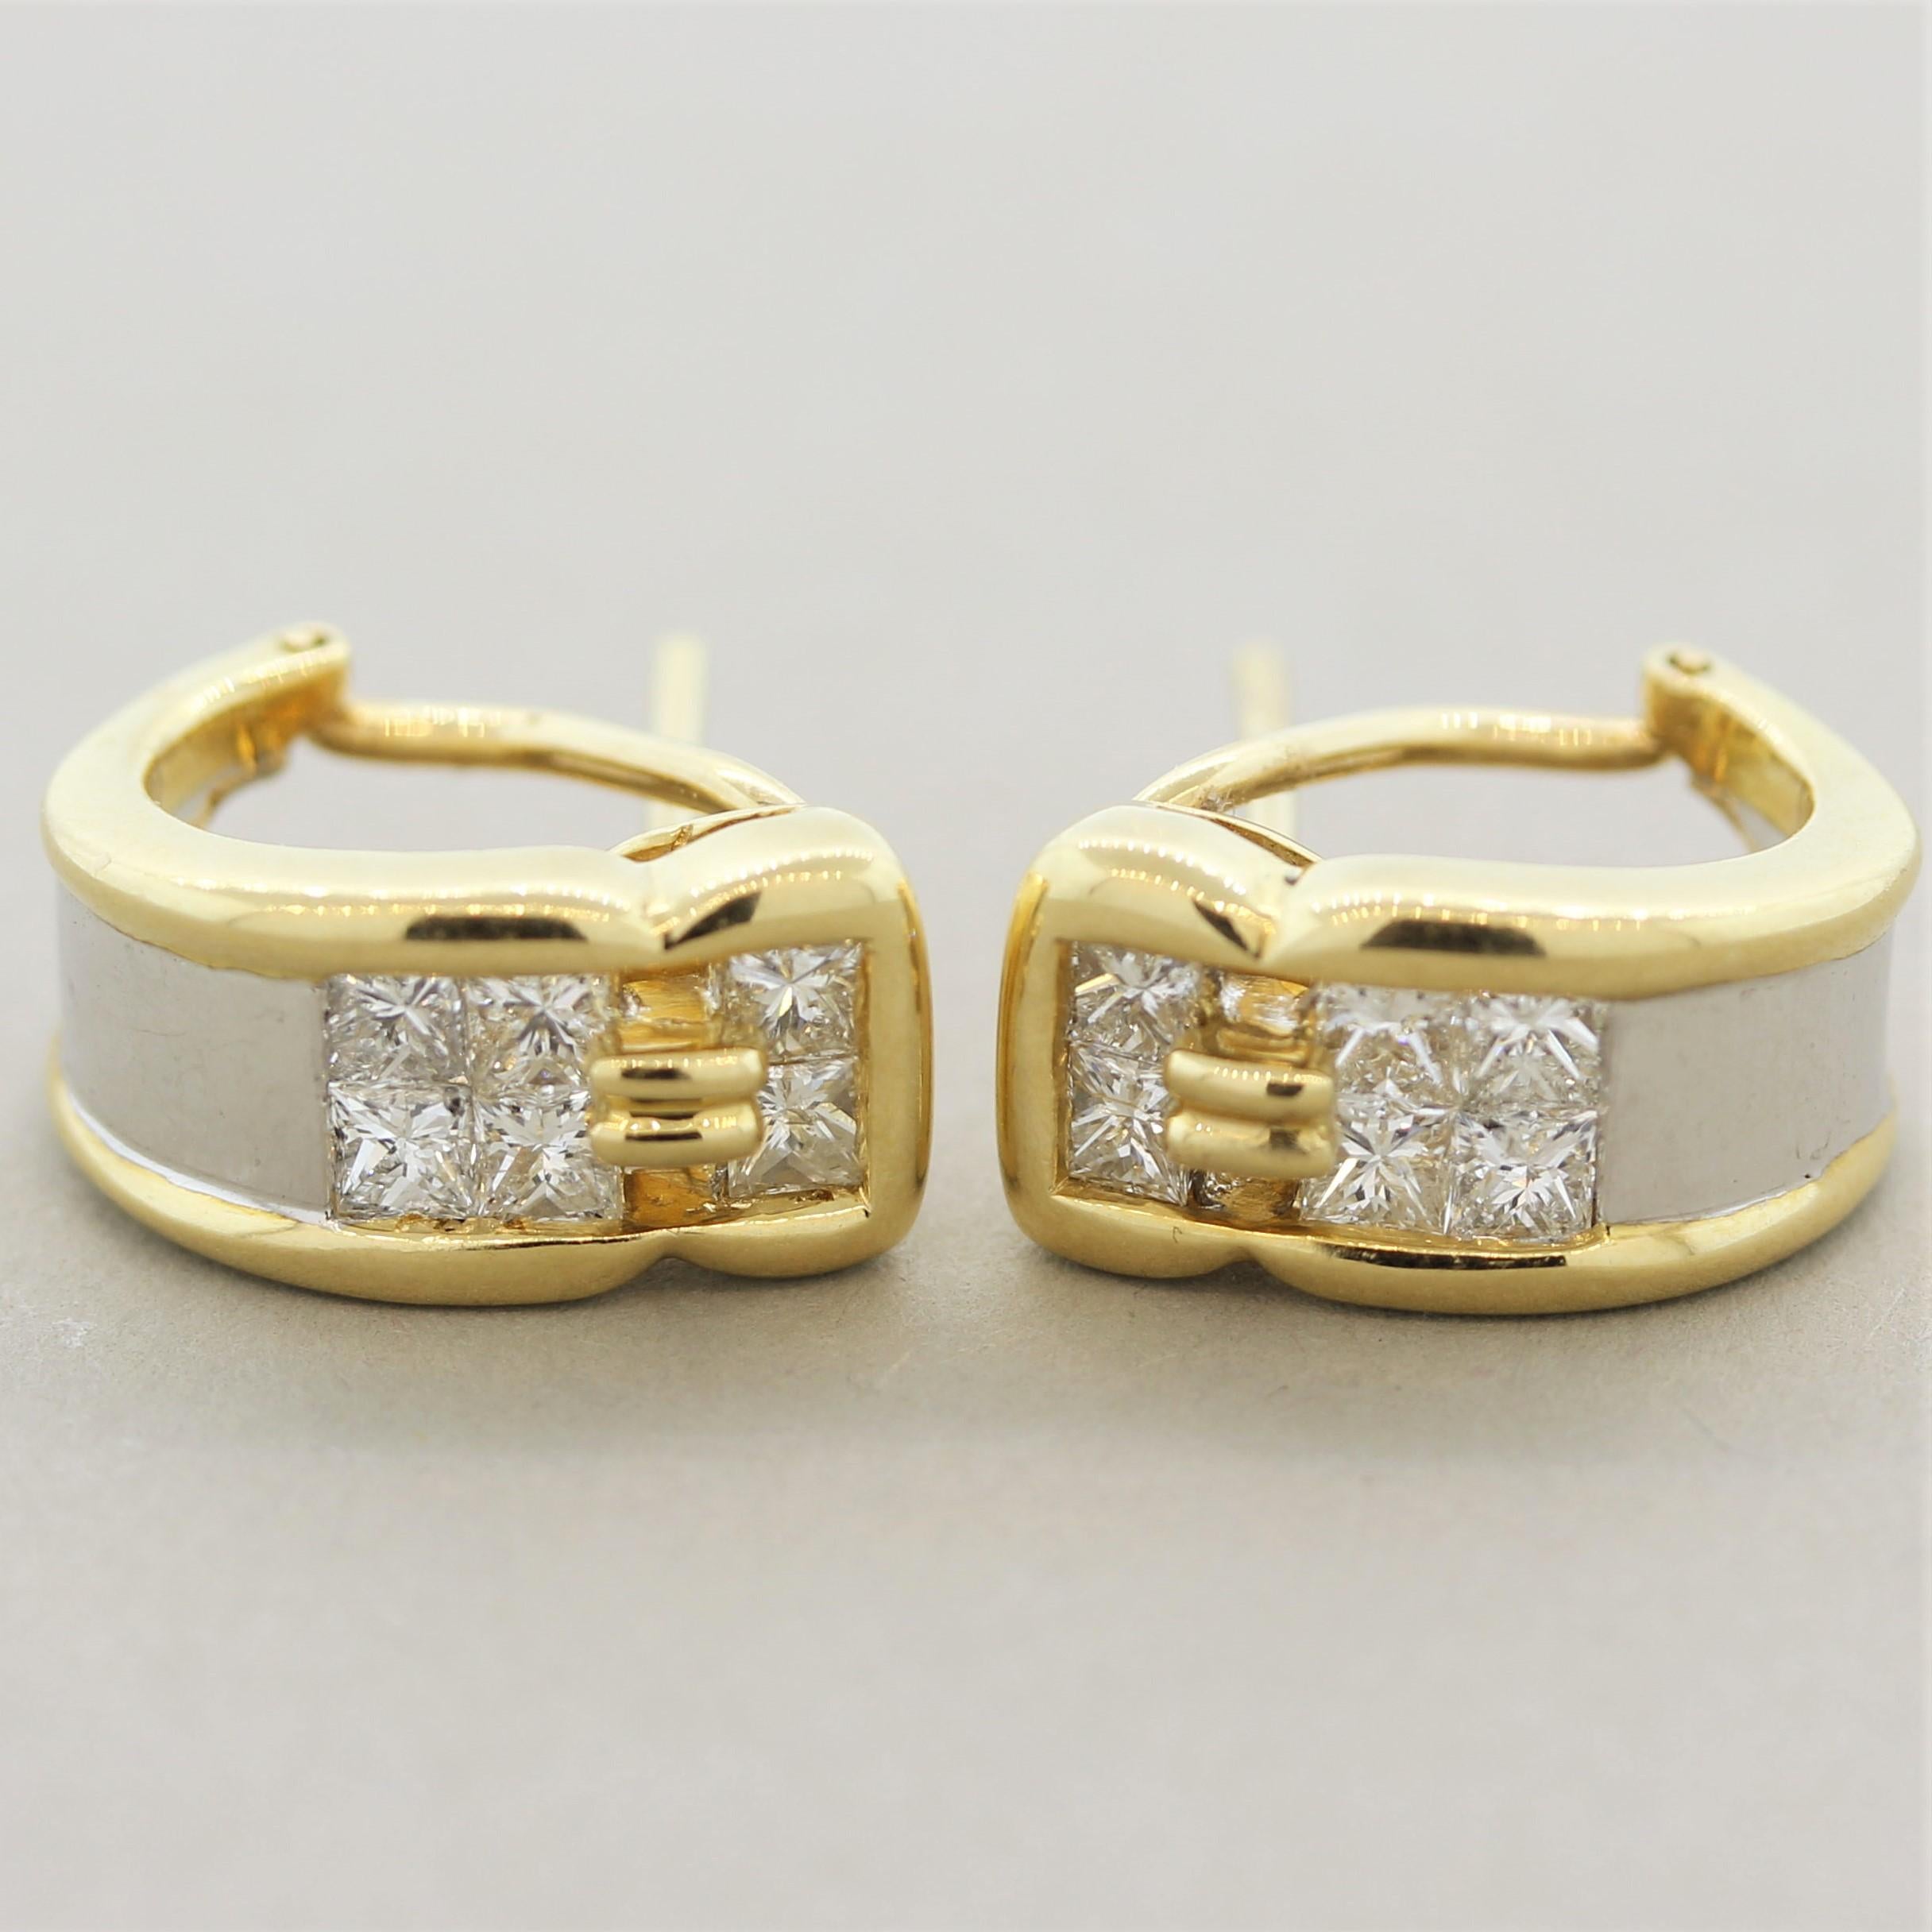 A sweet and stylish pair of huggie earrings. They feature a total of 1.42 carats of princess cut diamonds, 6 stones per earring. They are made in both 18k yellow gold as well as platinum for a two-tone look.

Length: 0.6 inches